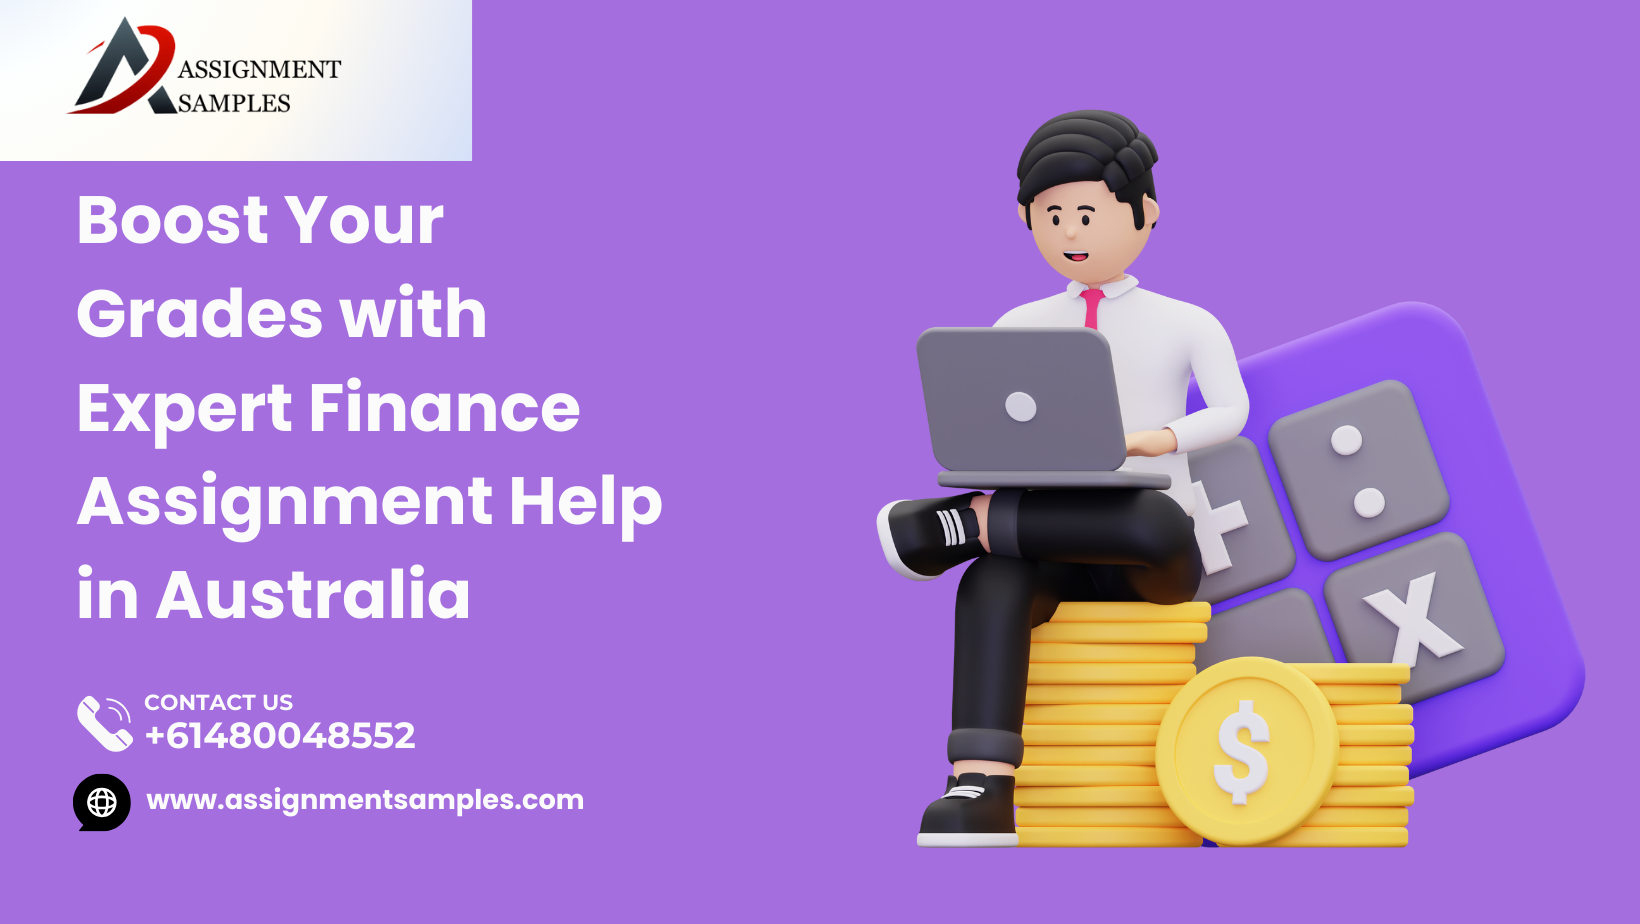 Boost Your Grades with Expert Finance Assignment Help in Australia